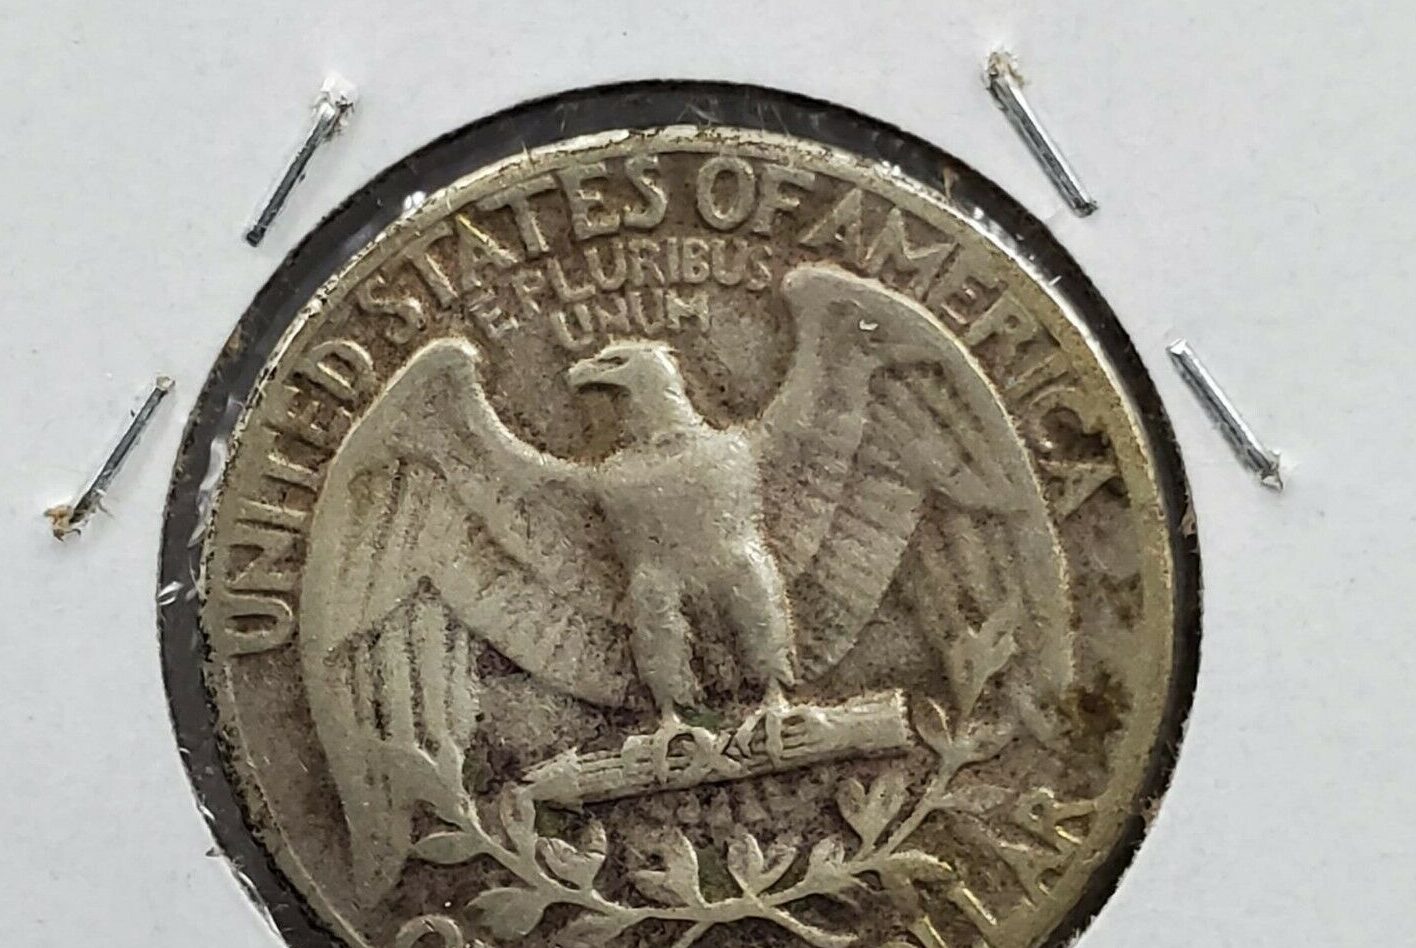 1964 P 25C Washington 90% Silver Quarter Coin Choice Circulated or Best condition available